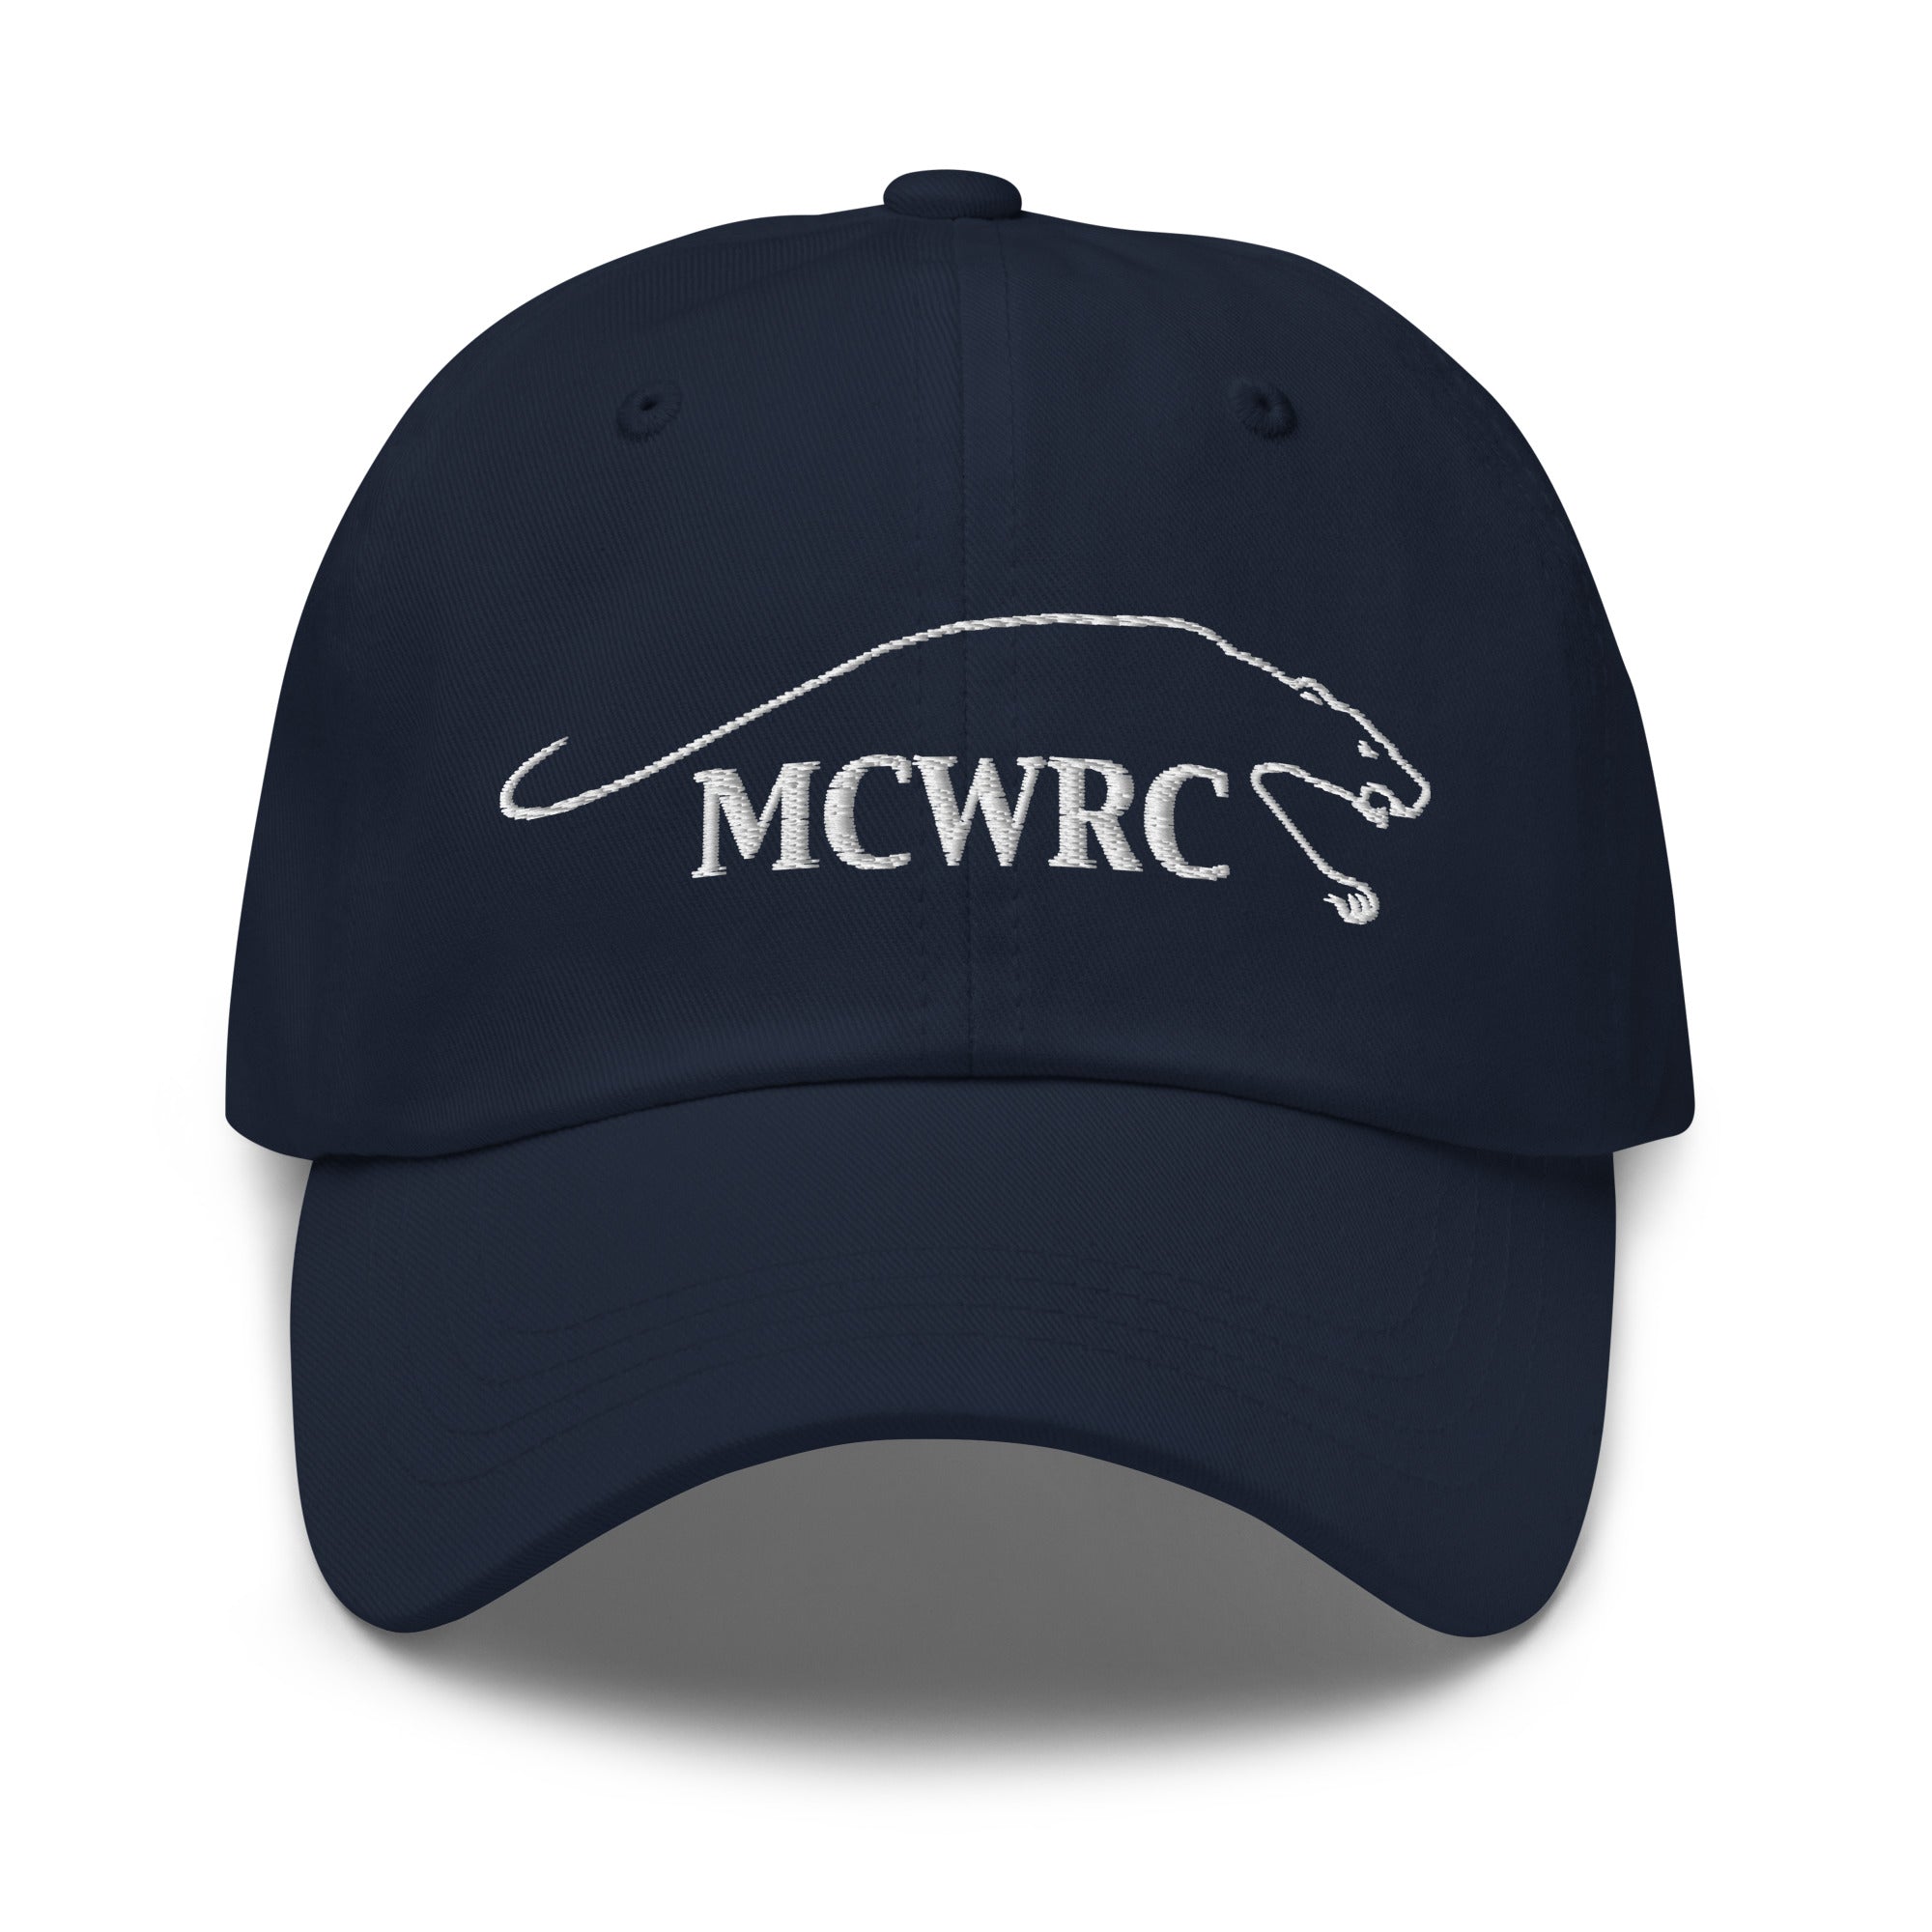 Rugby Imports MCWRC Adjustable Hat